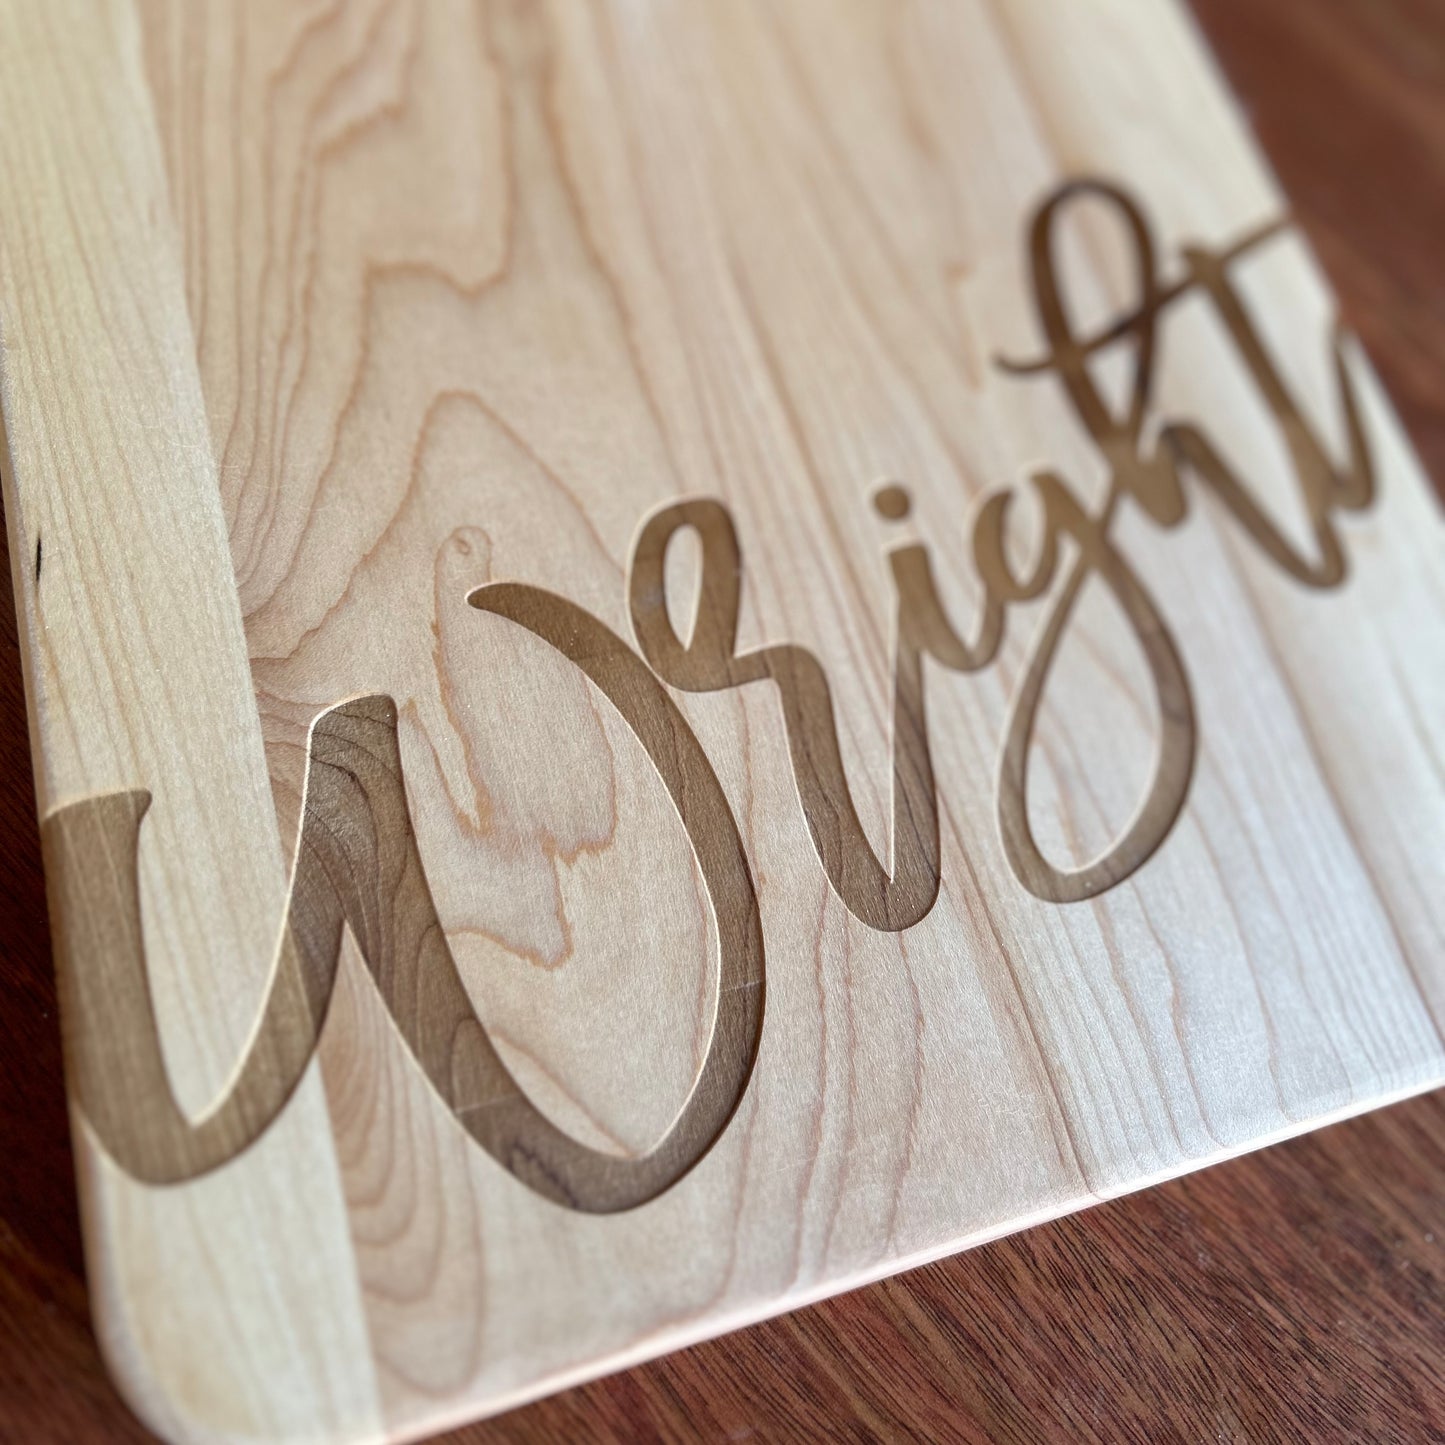 Personalized Maple Cutting Board with Rounded Handle - "Clean" Font